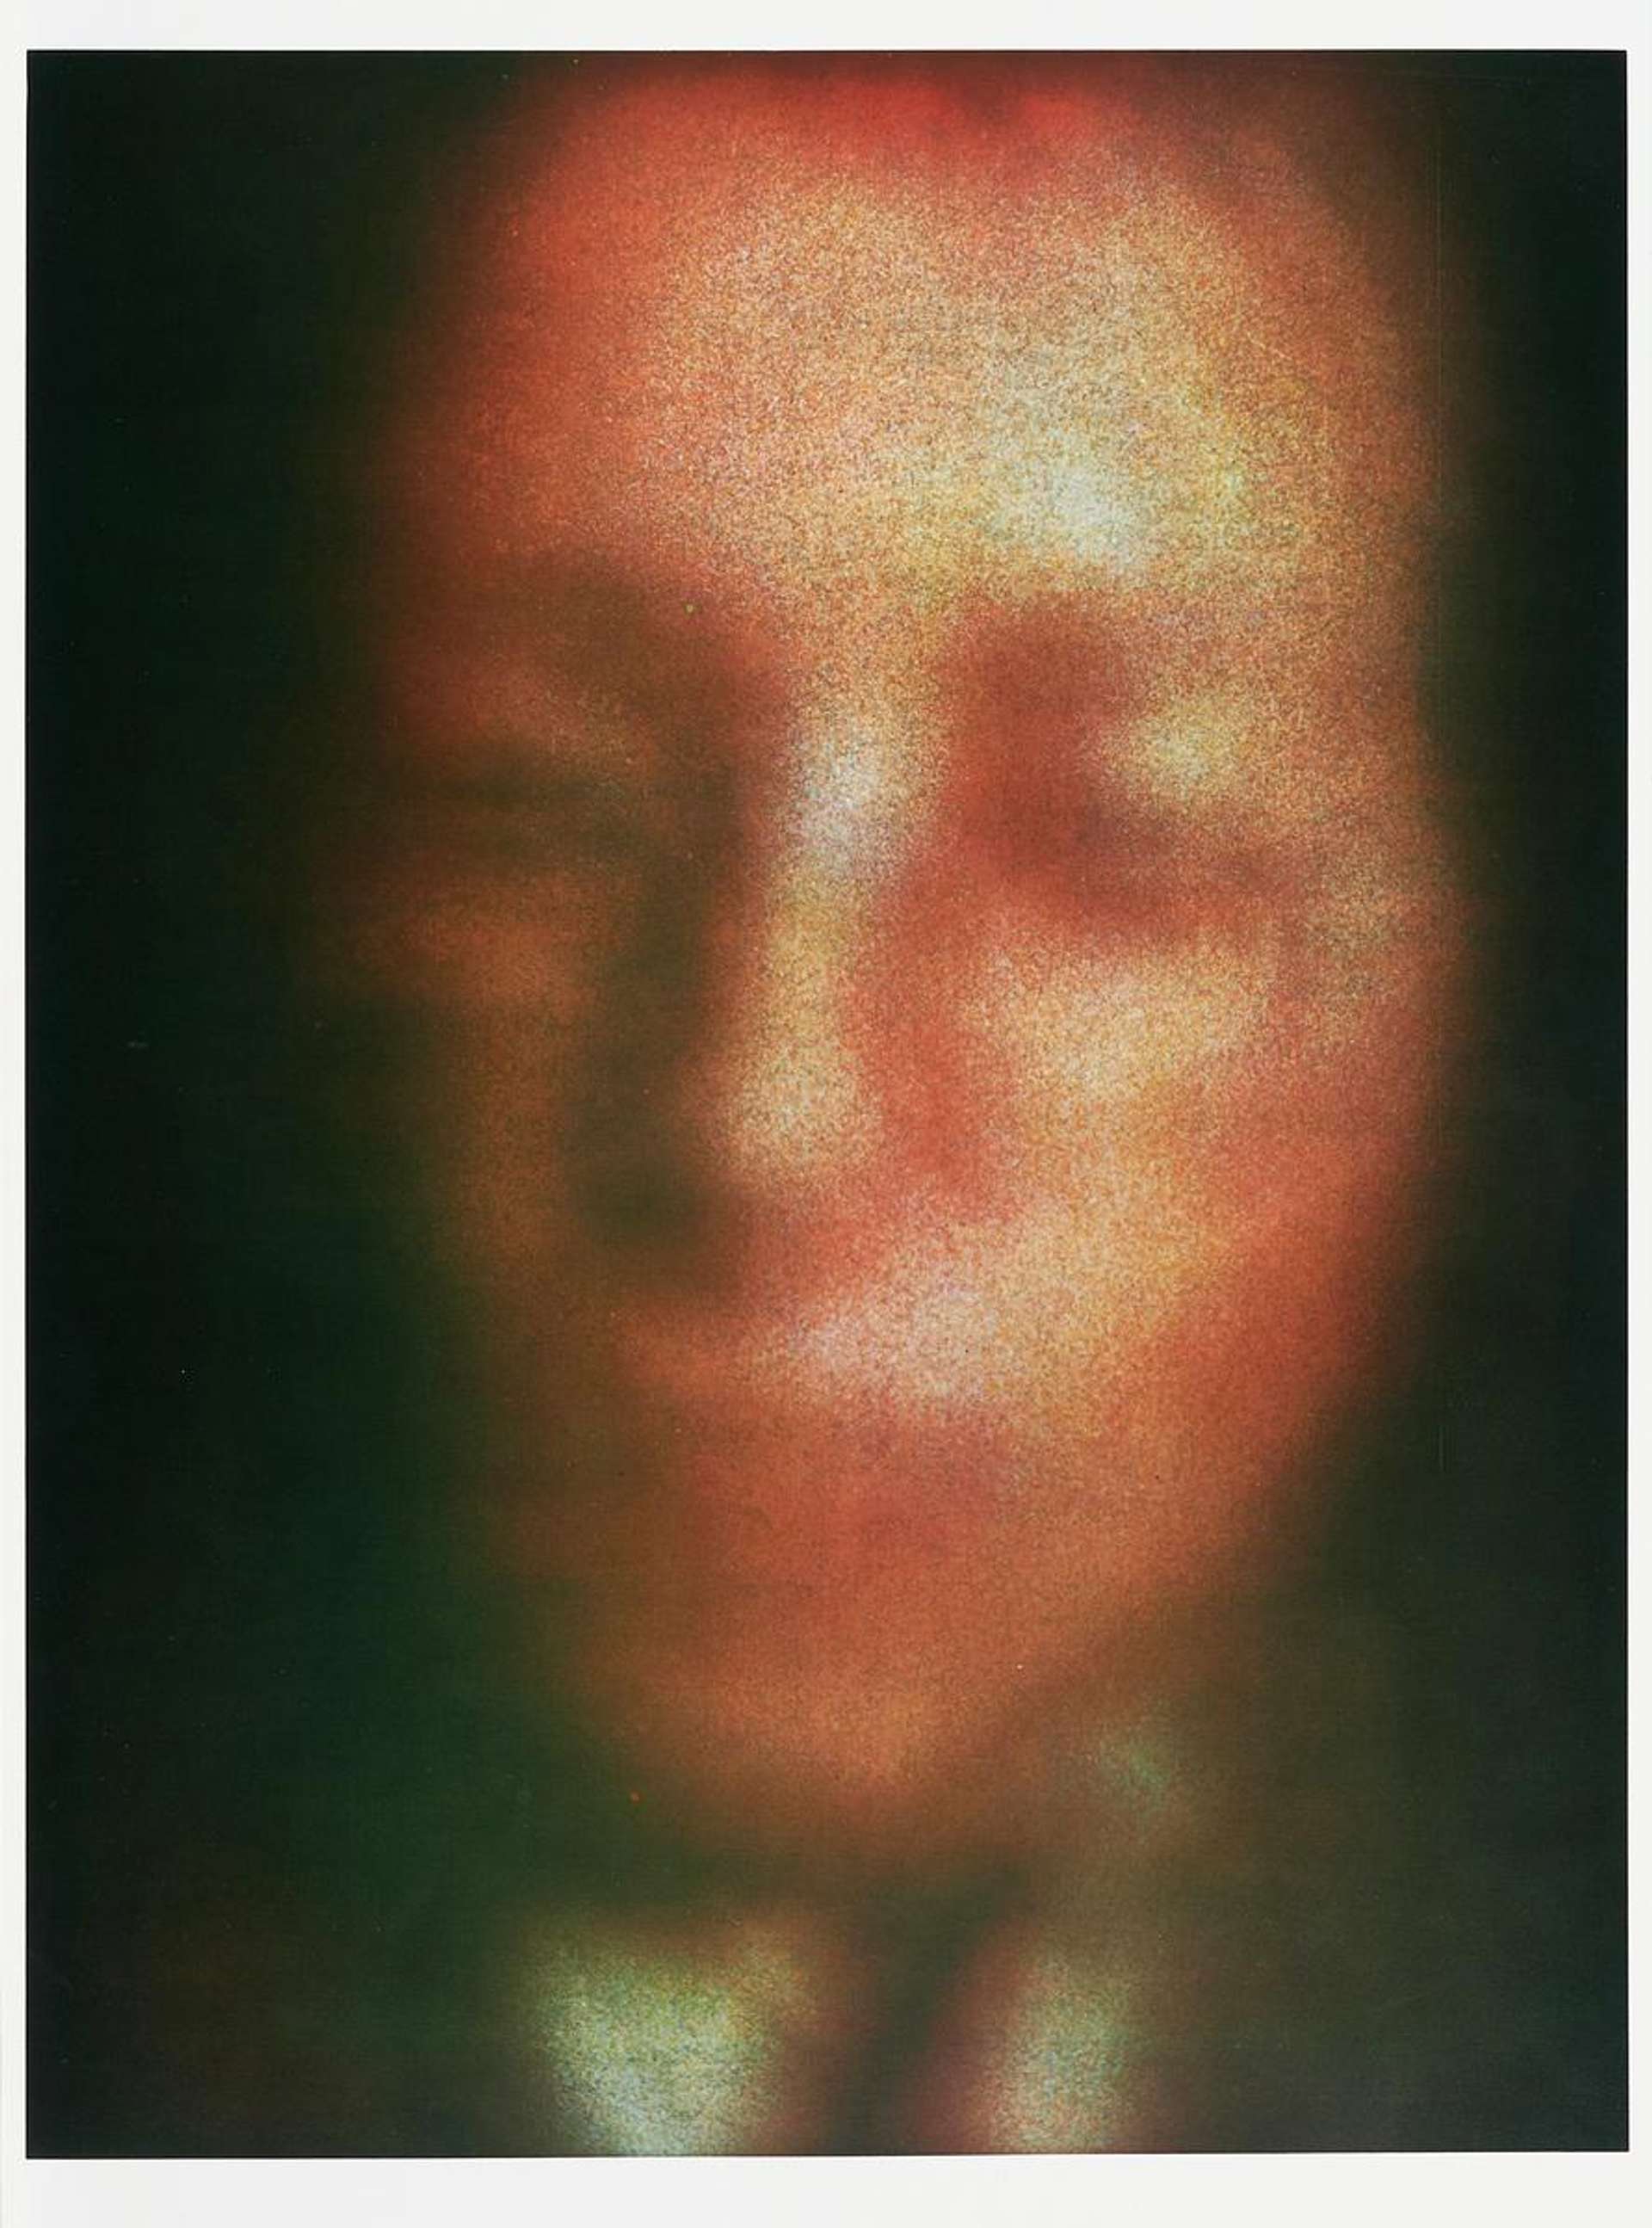 Gerhard Richter’s Heiner Friedrich. A lithograph of a burred photograph of someone with their eyes closed.